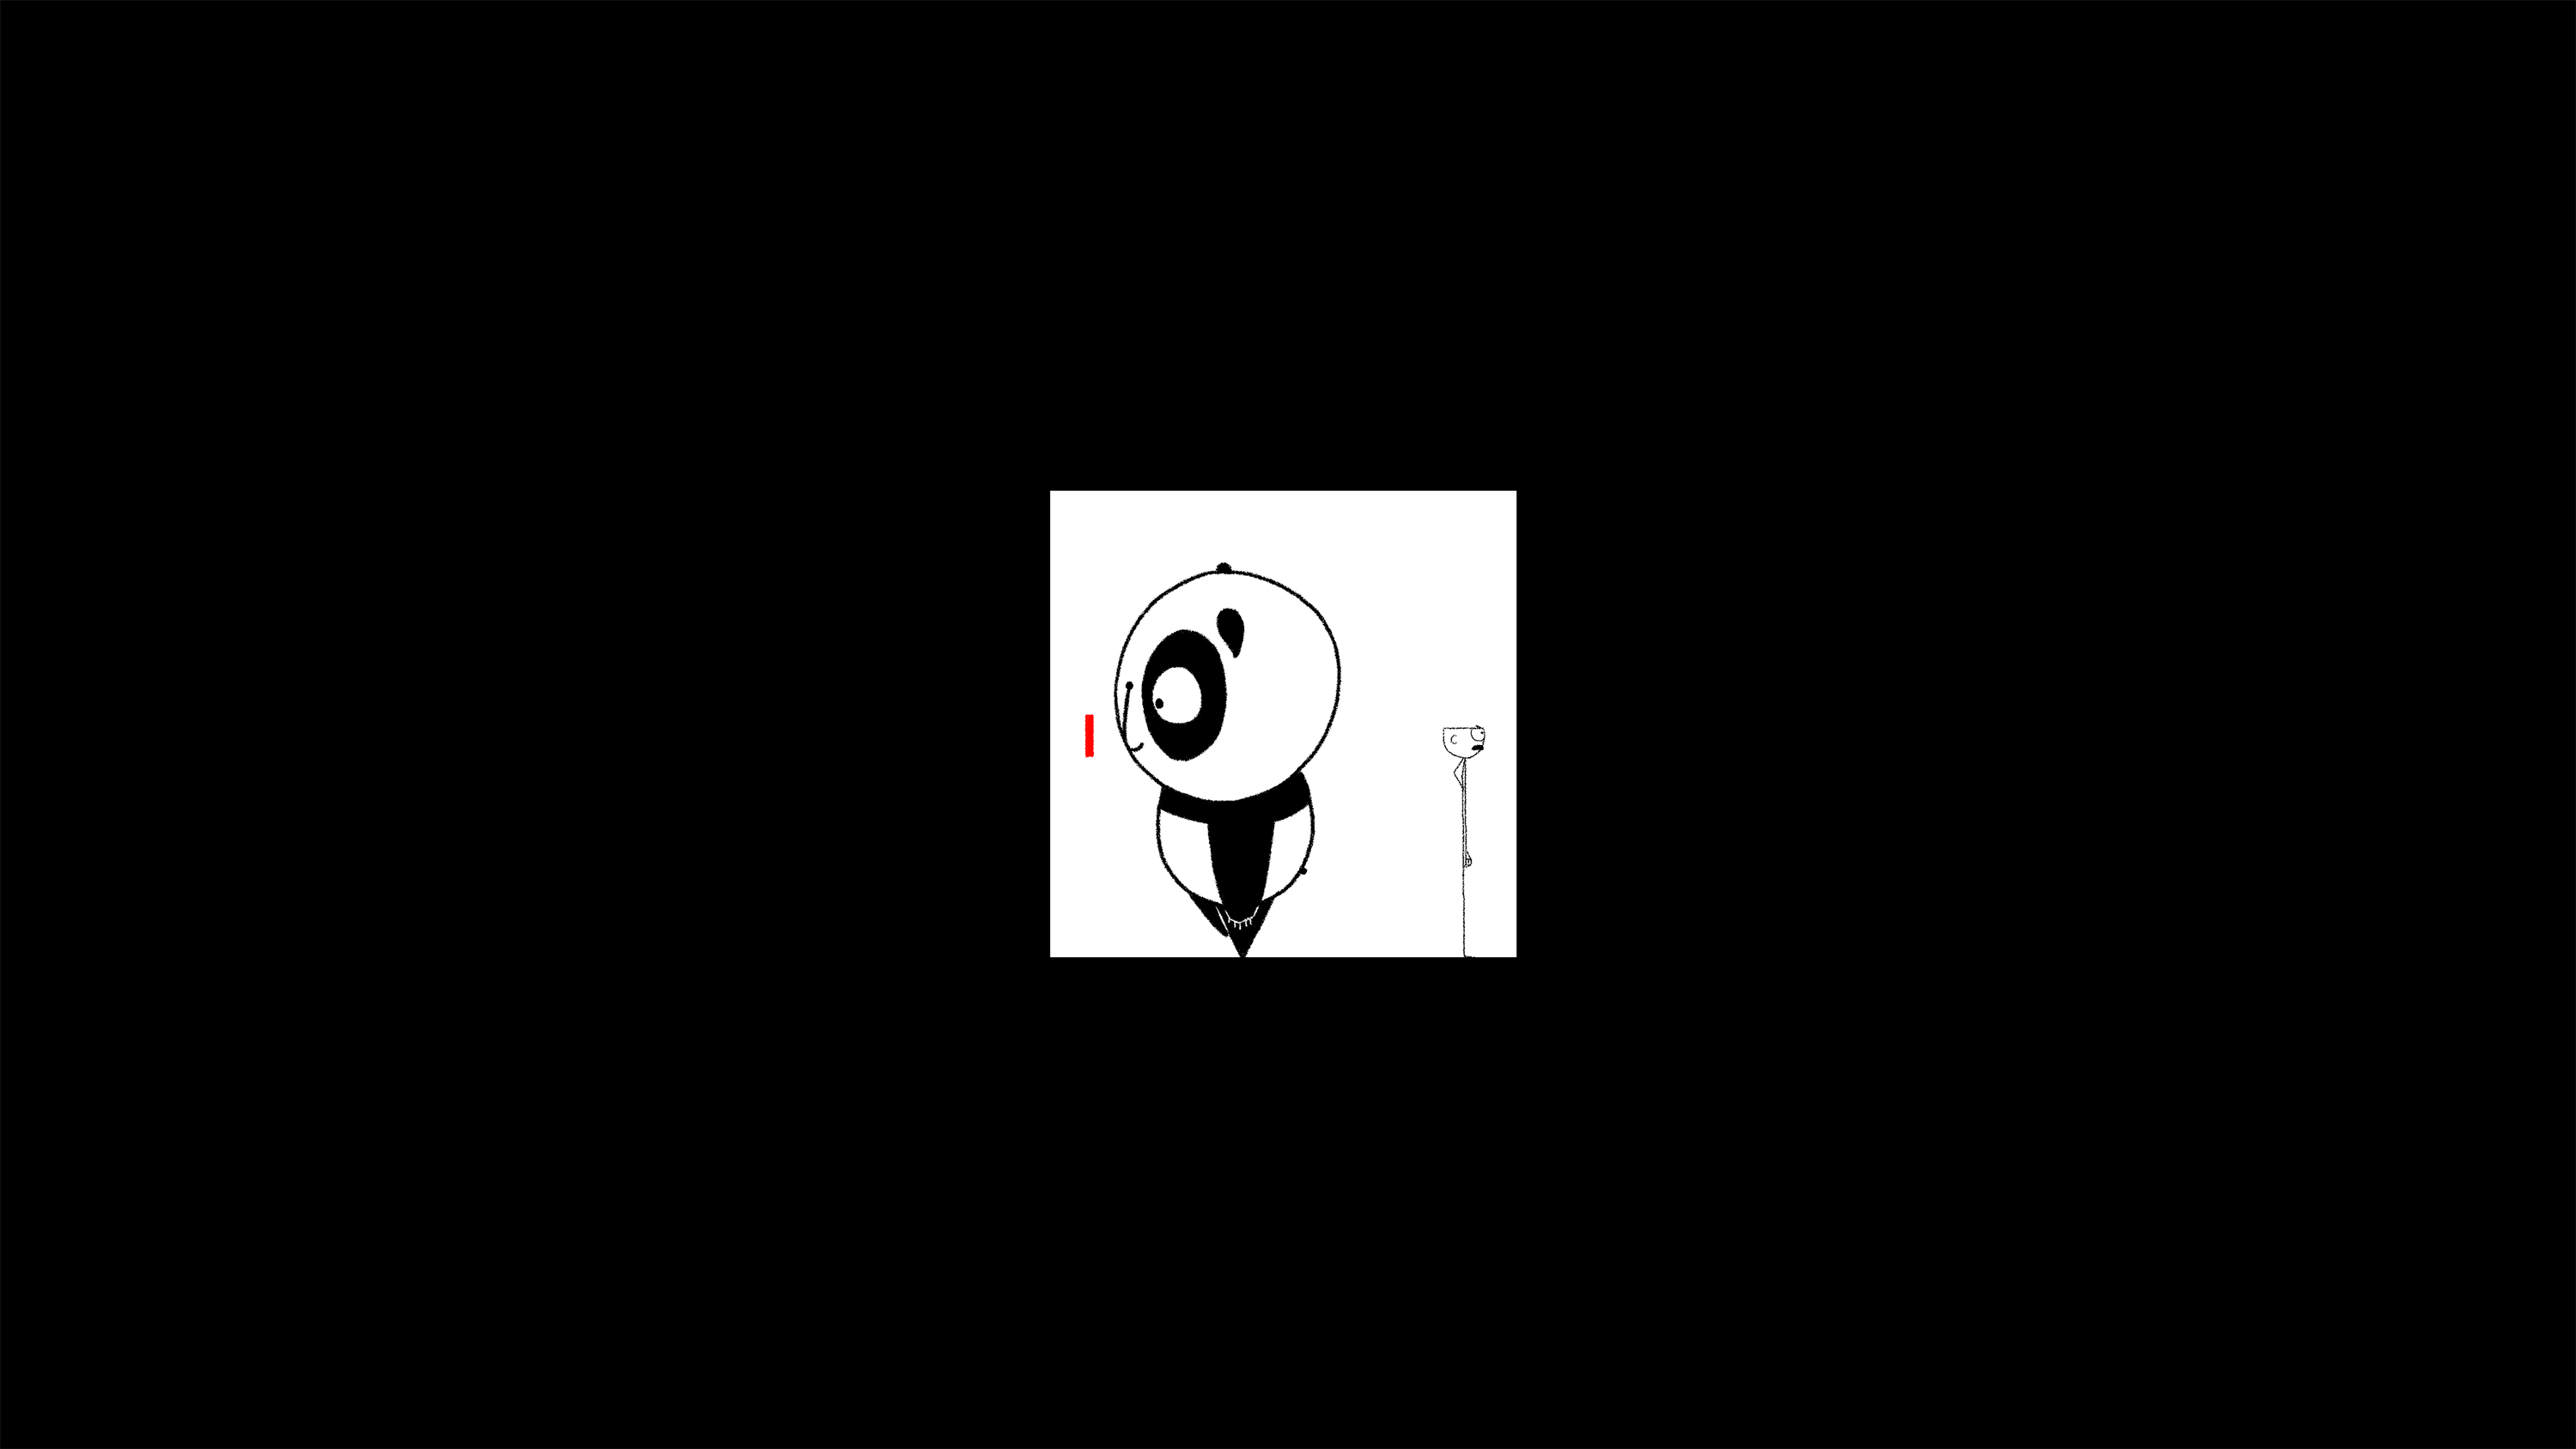 Still from animation, with illustrated panda and illustrated stick man facing away from each other